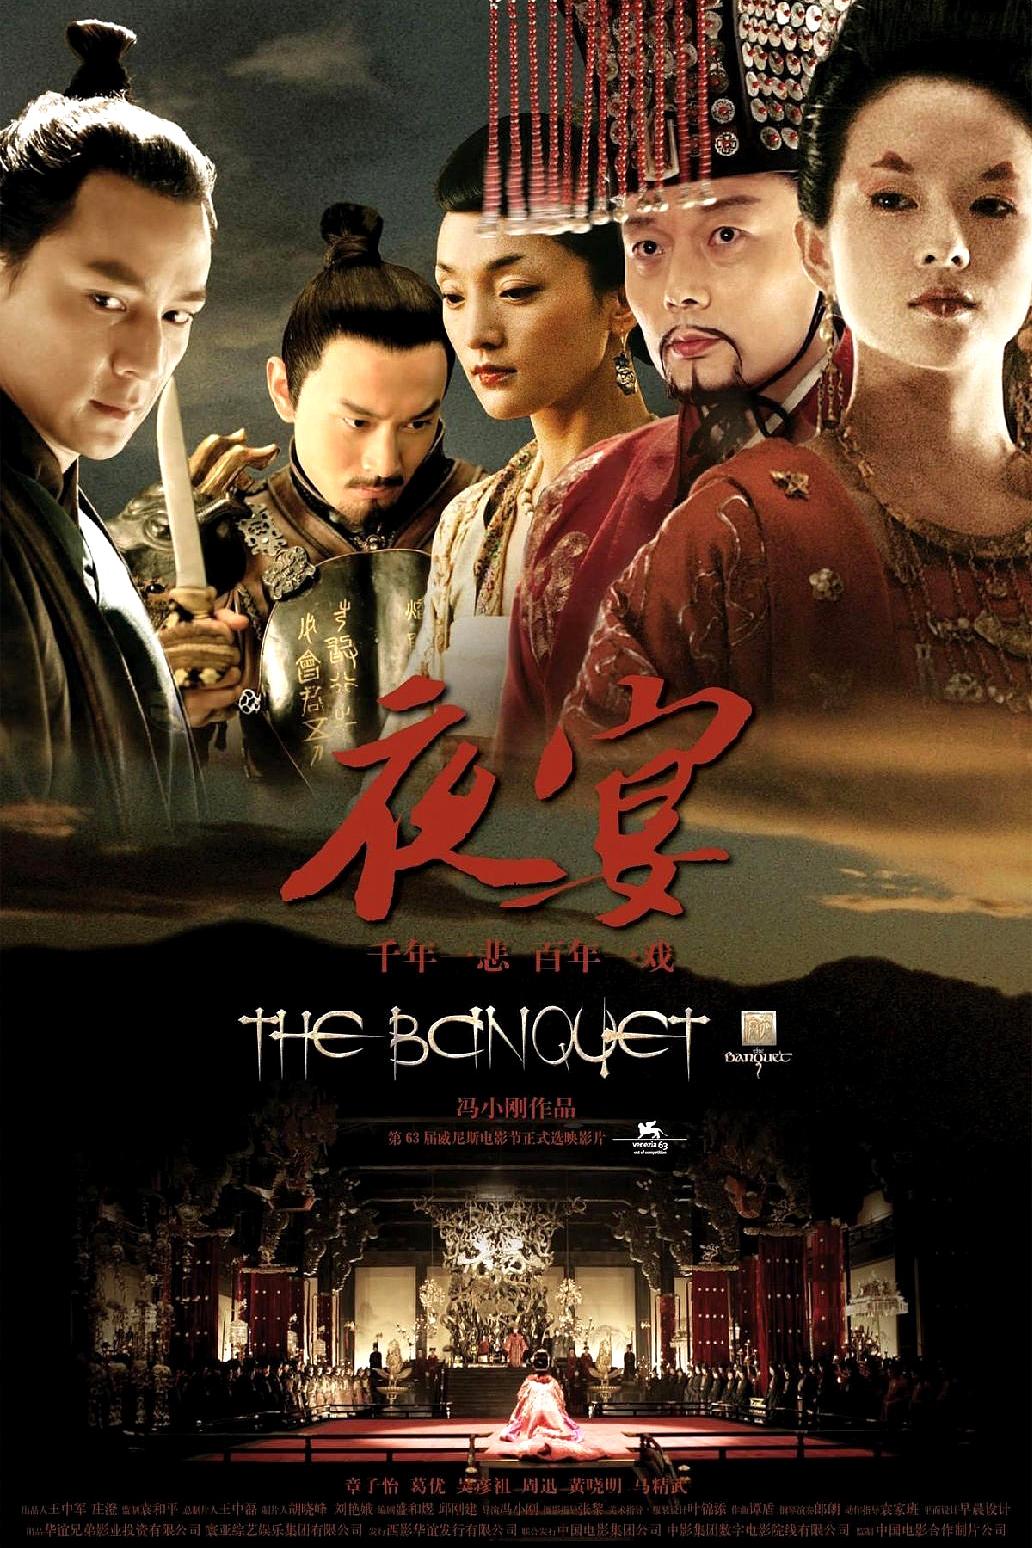 ҹ The.Banquet.2006.CHINESE.1080p.BluRay.x264.DTS-FGT 11.88GB-1.png